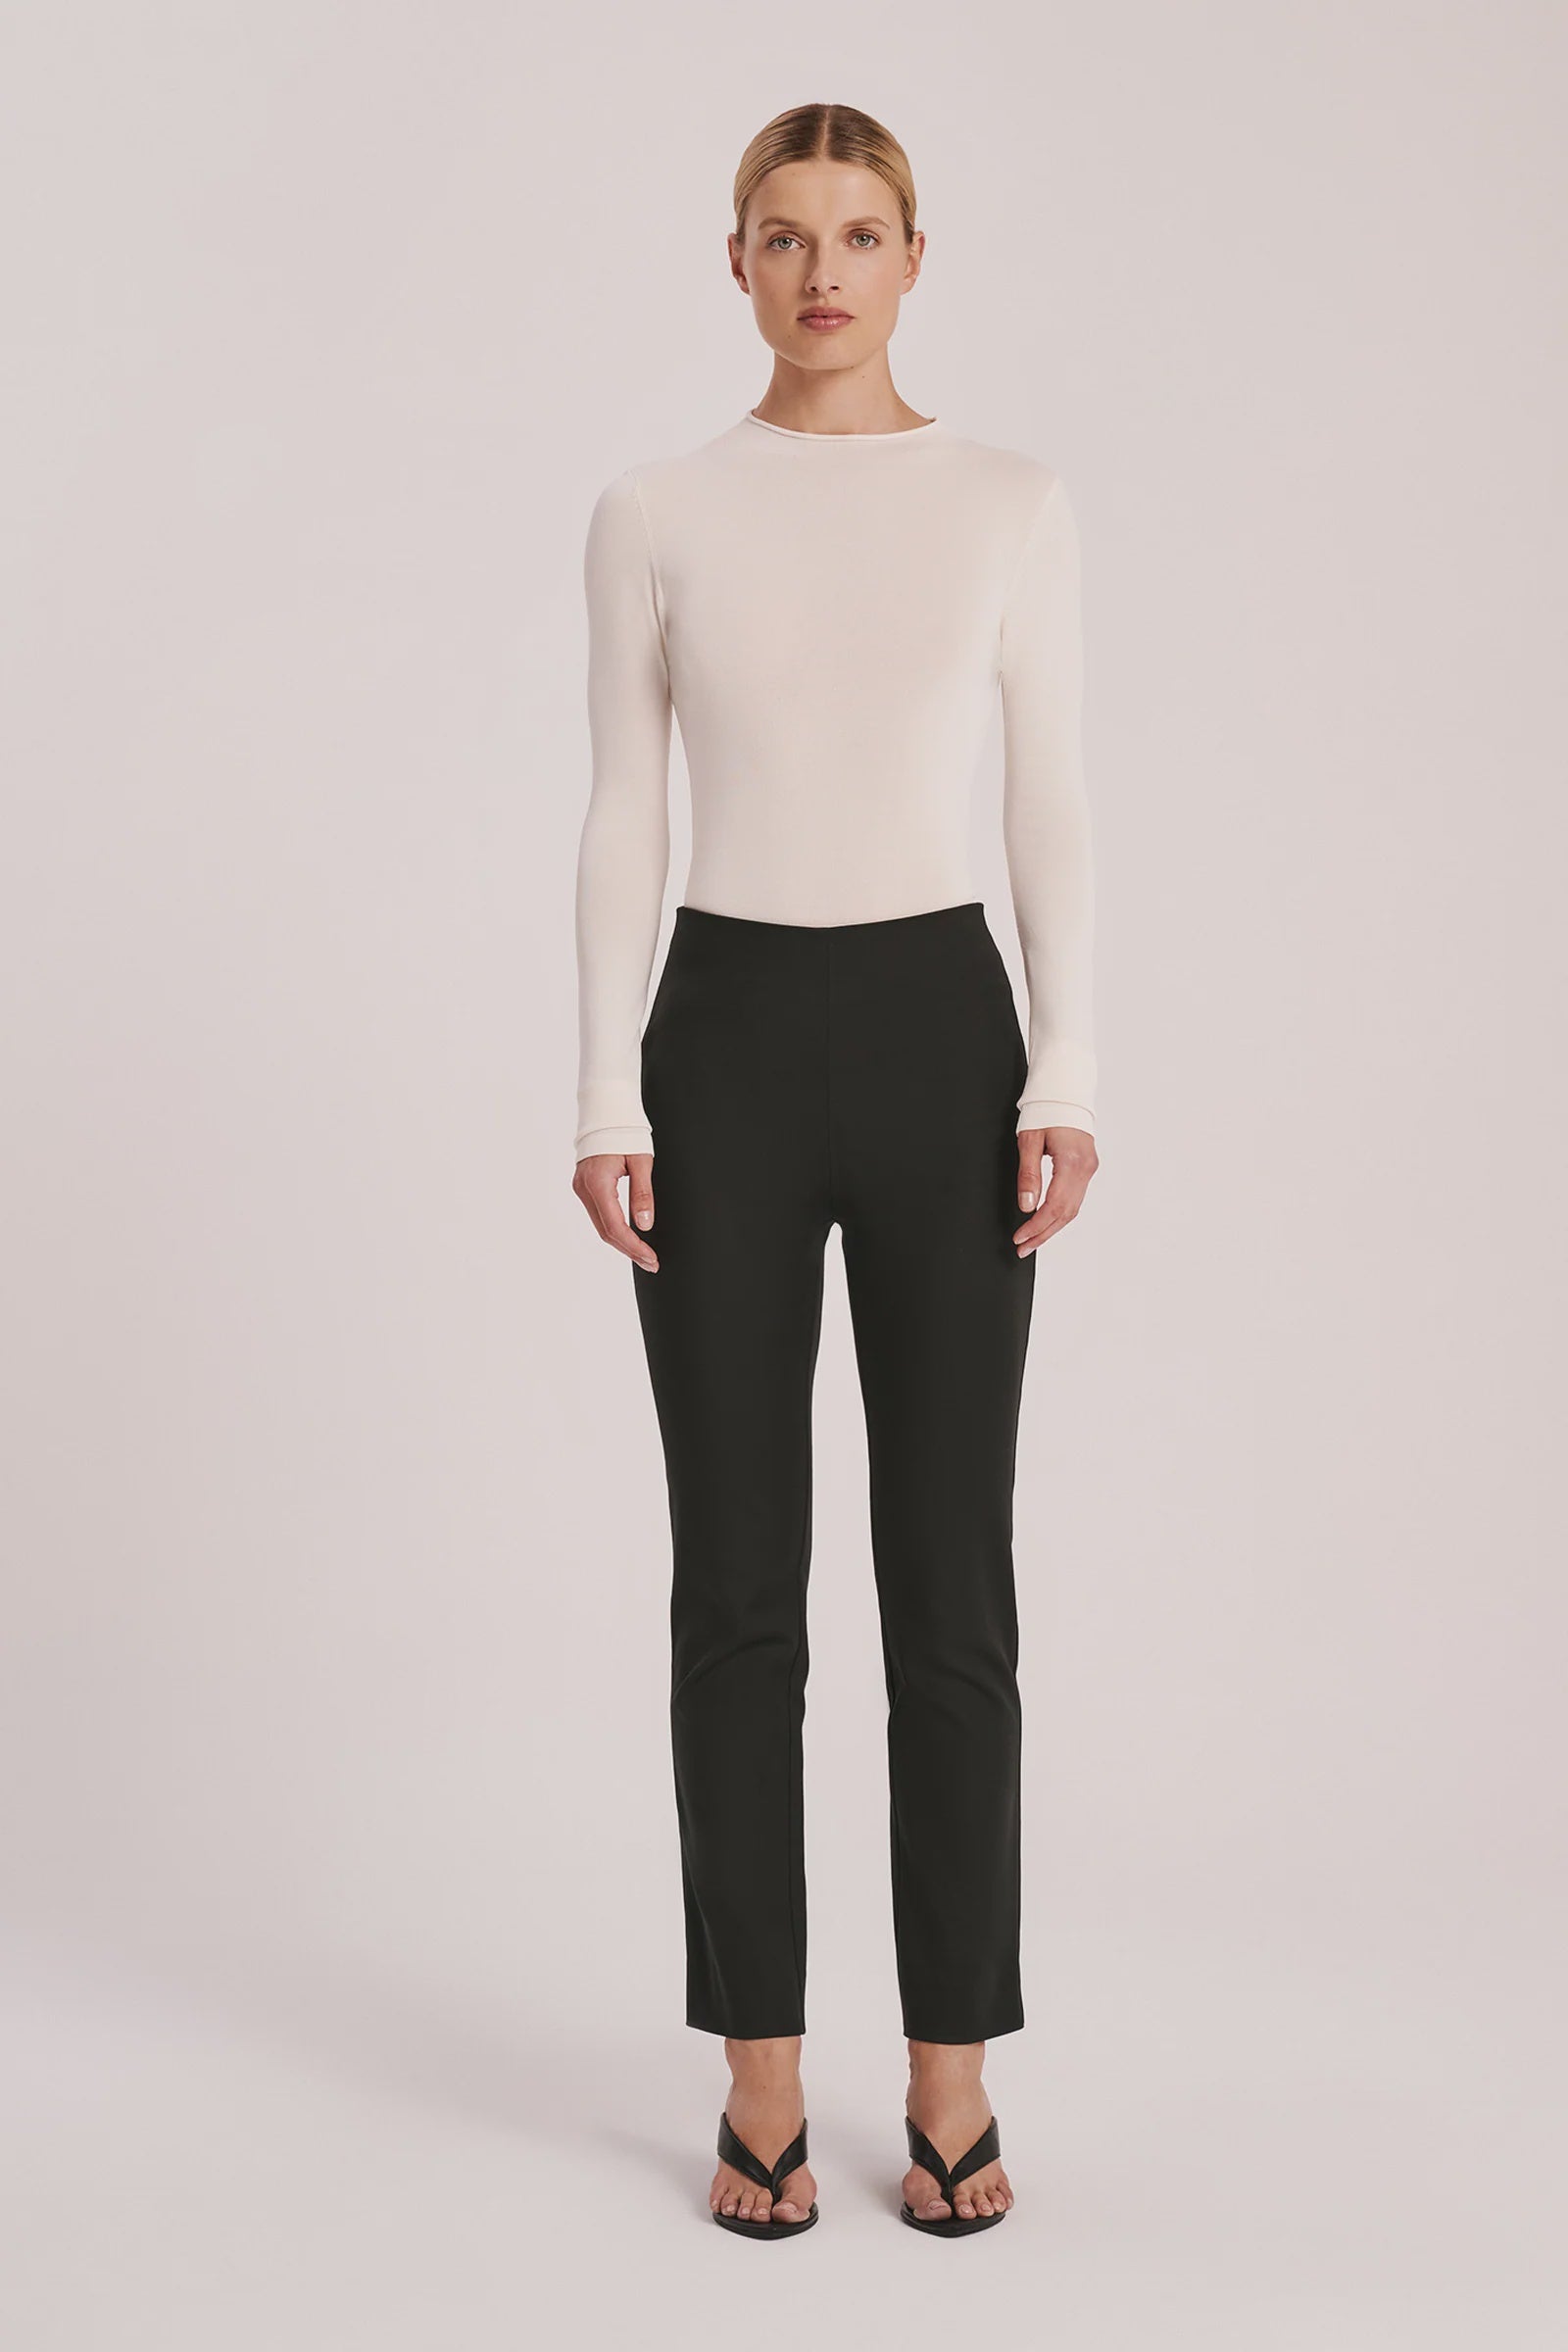 Nude Lucy | Delyse Pant - Black